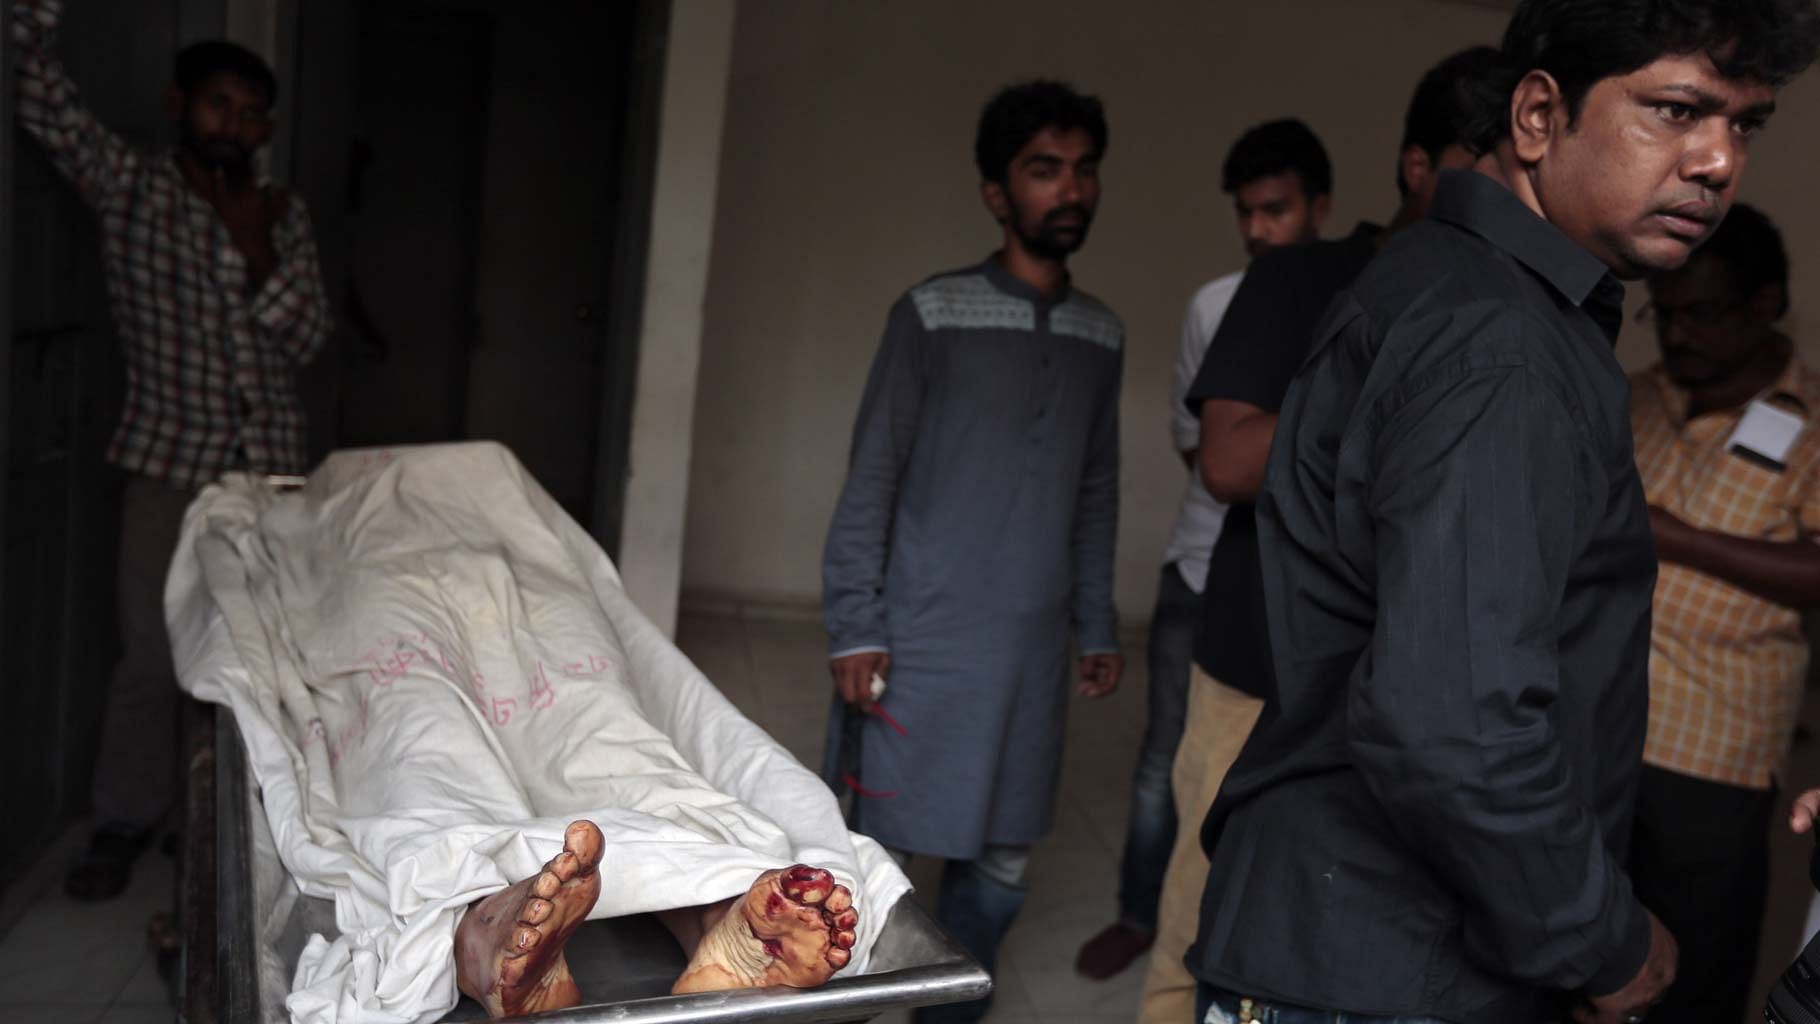 The body of Xulhaz Mannan, who was stabbed to death by unidentified assailants, being carried out of a hospital morgue in Dhaka. (Photo: AP)